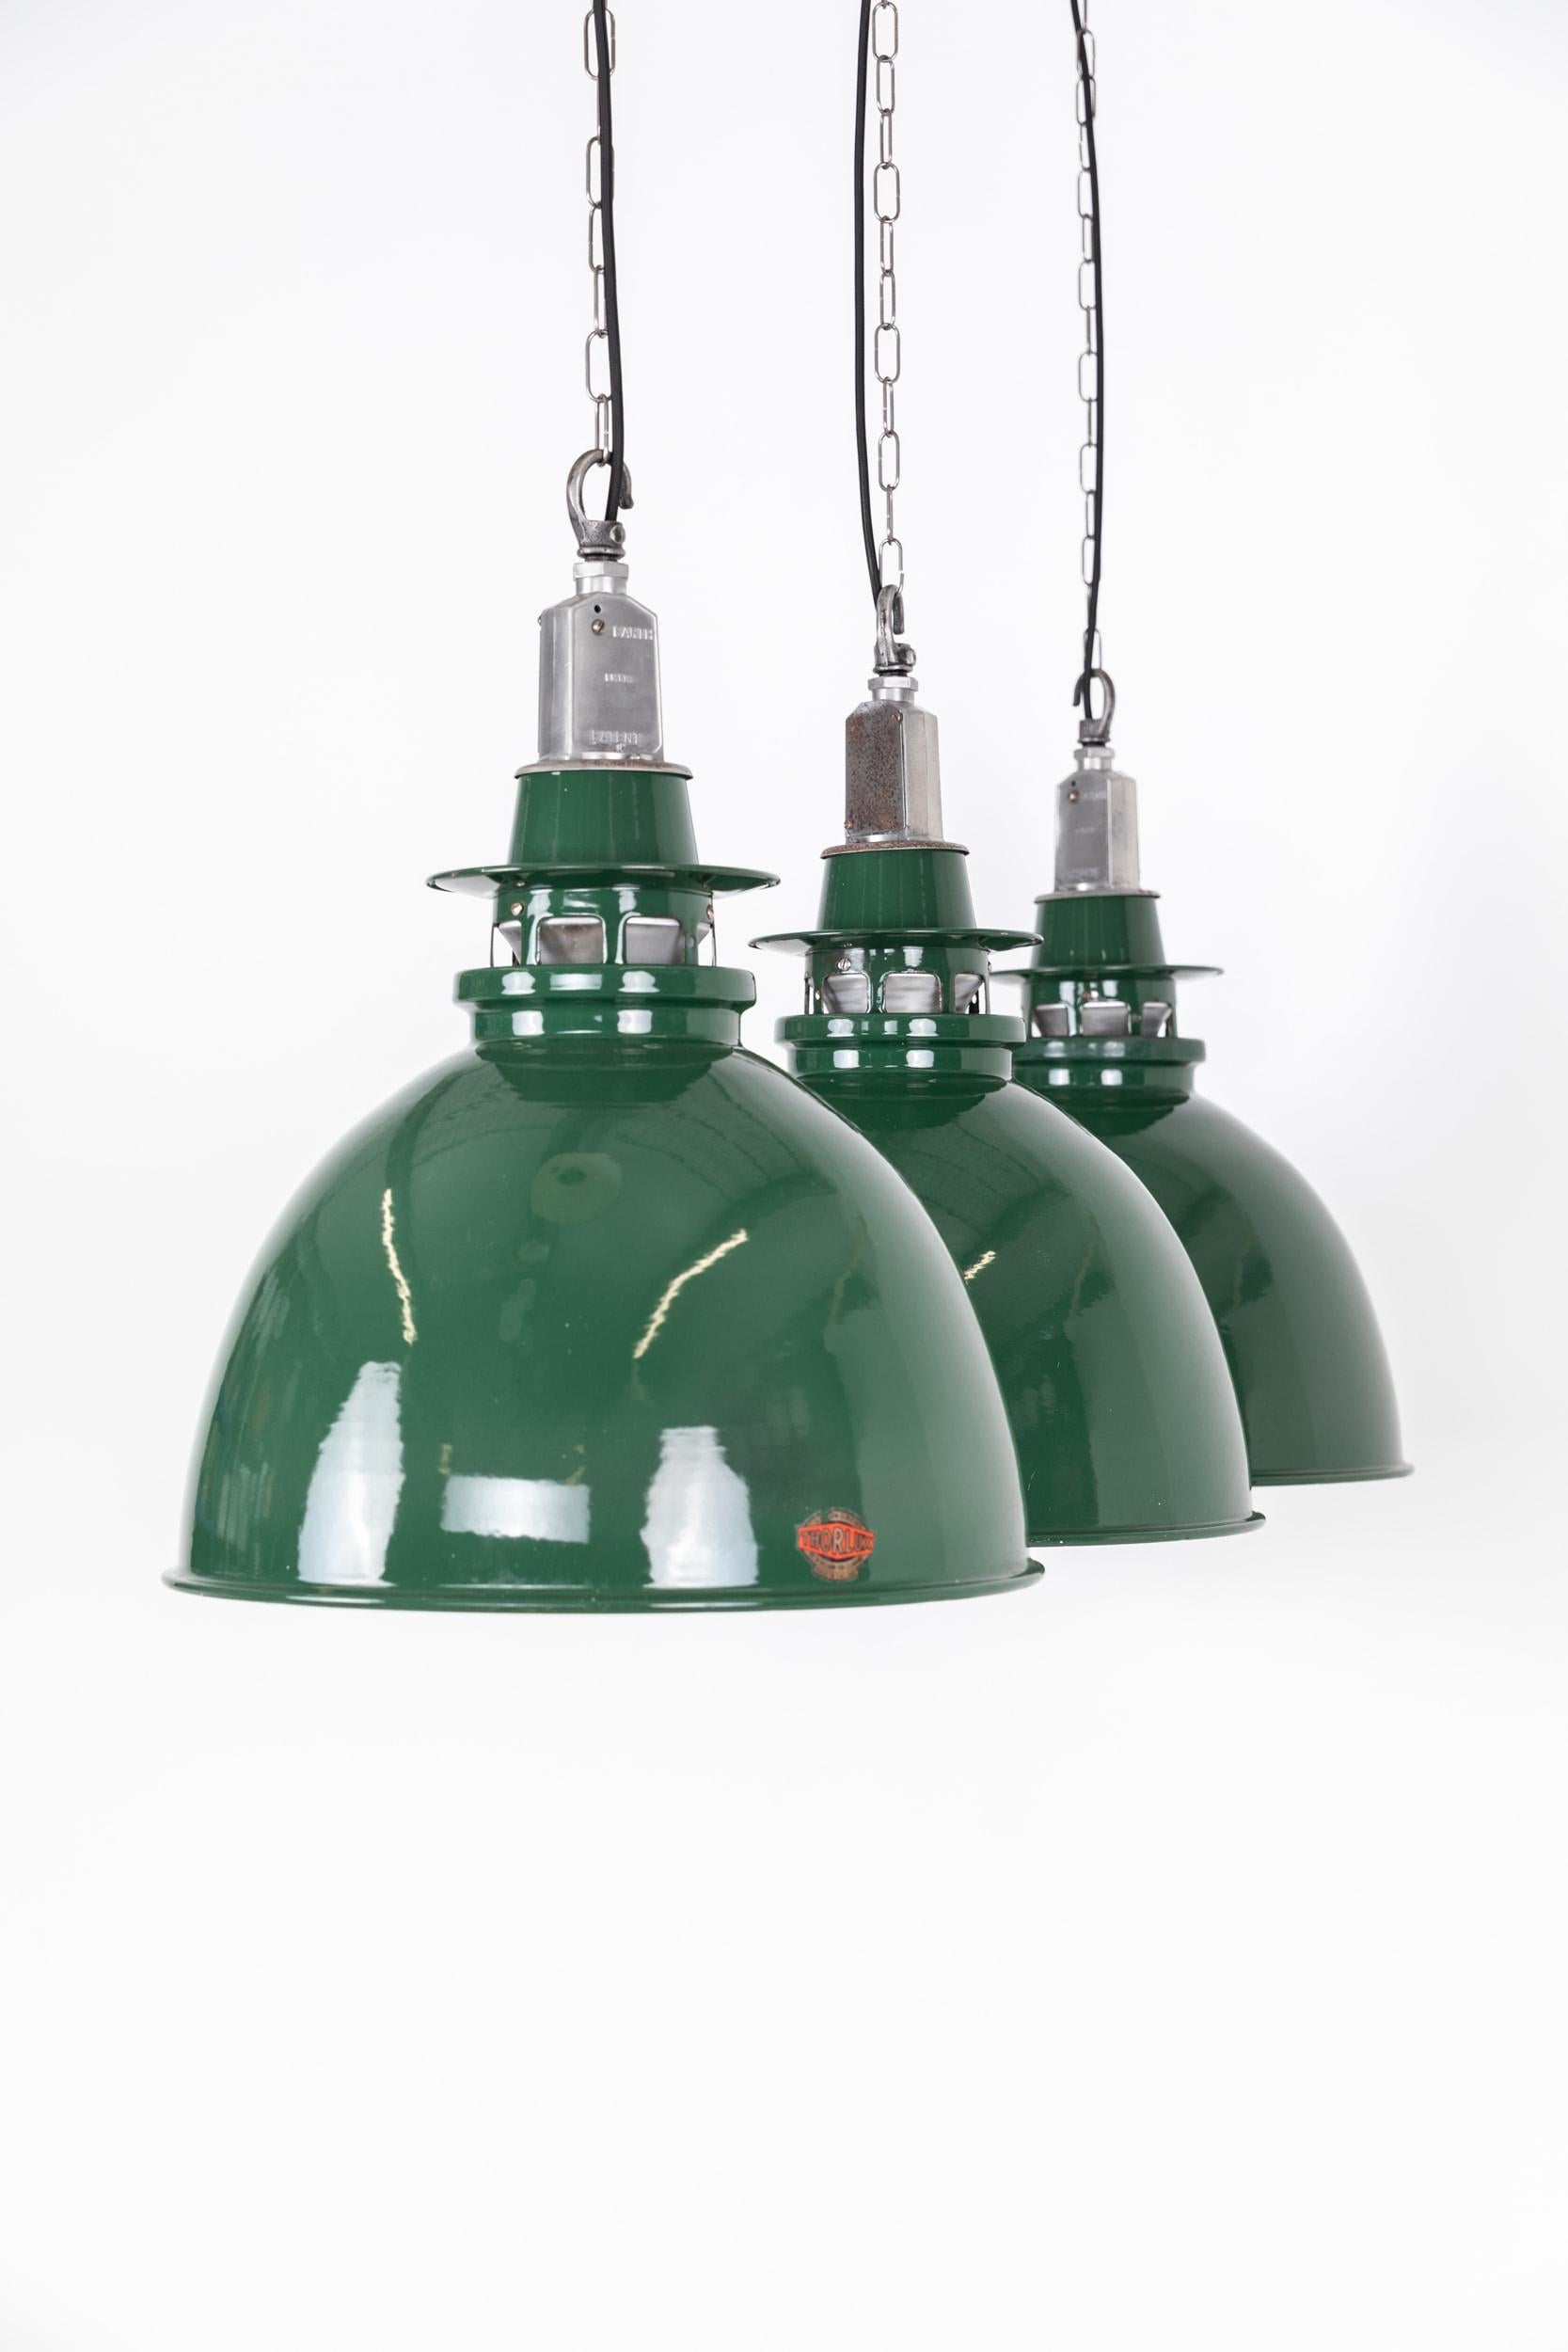 A run of green vitreous enamel pendant lights by renowned lighting manufactures Thorlux. c.1940

Two-part enamel shades, overall in great original condition with only some age related marks and stripped cast galleries. Makers labels present on all